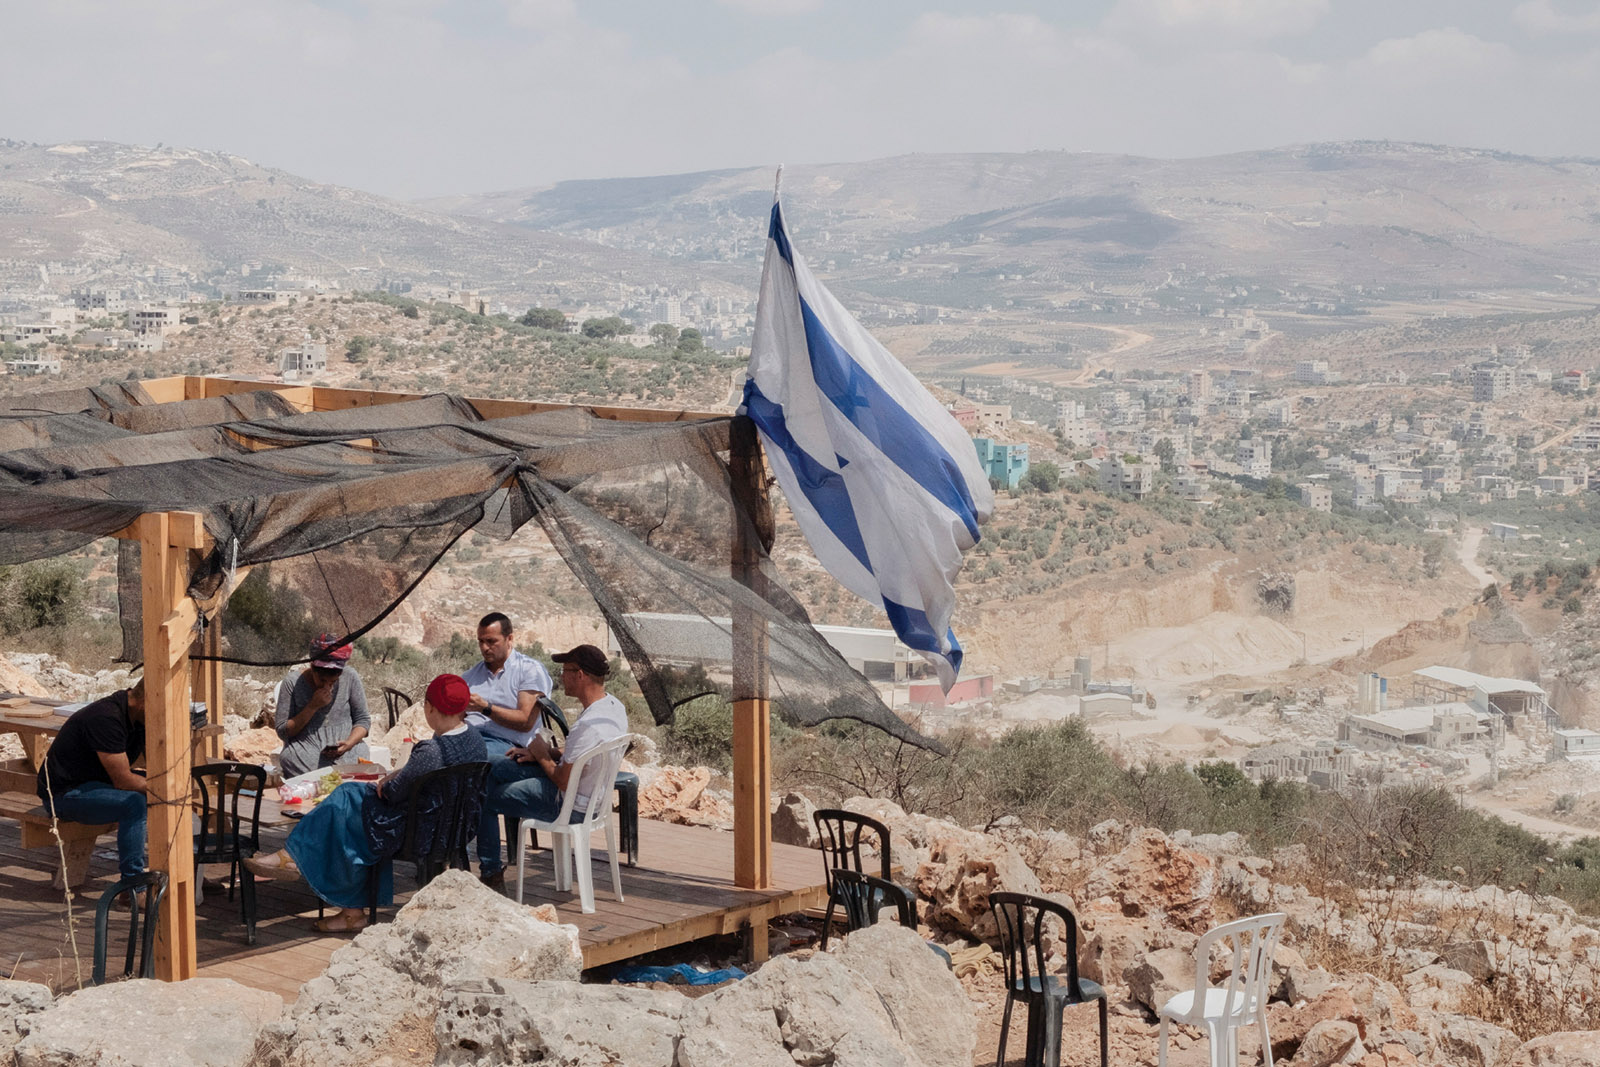 Israeli settlers in the illegal outpost of Evyatar, near the Palestinian village of Beita, West Bank